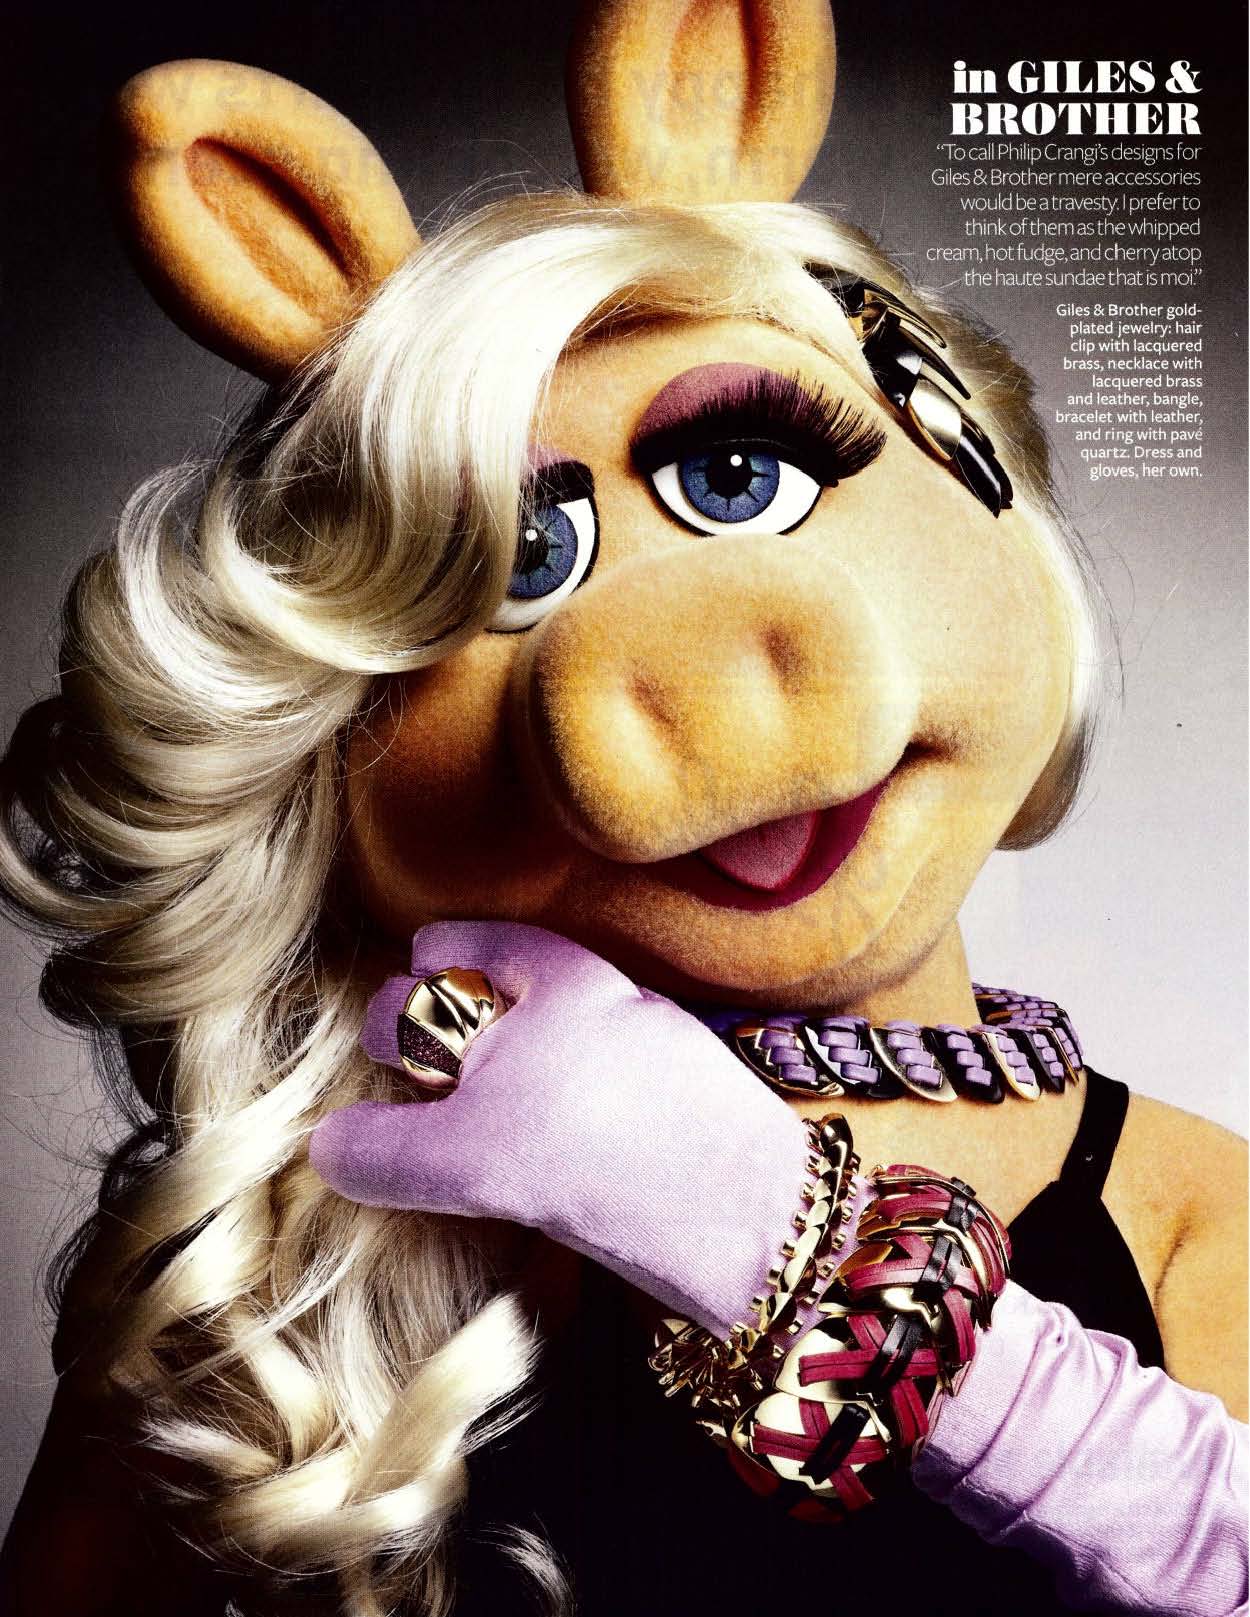 THE MUPPETS Miss Piggy Goes High Fashion We Are Movie Geeks.